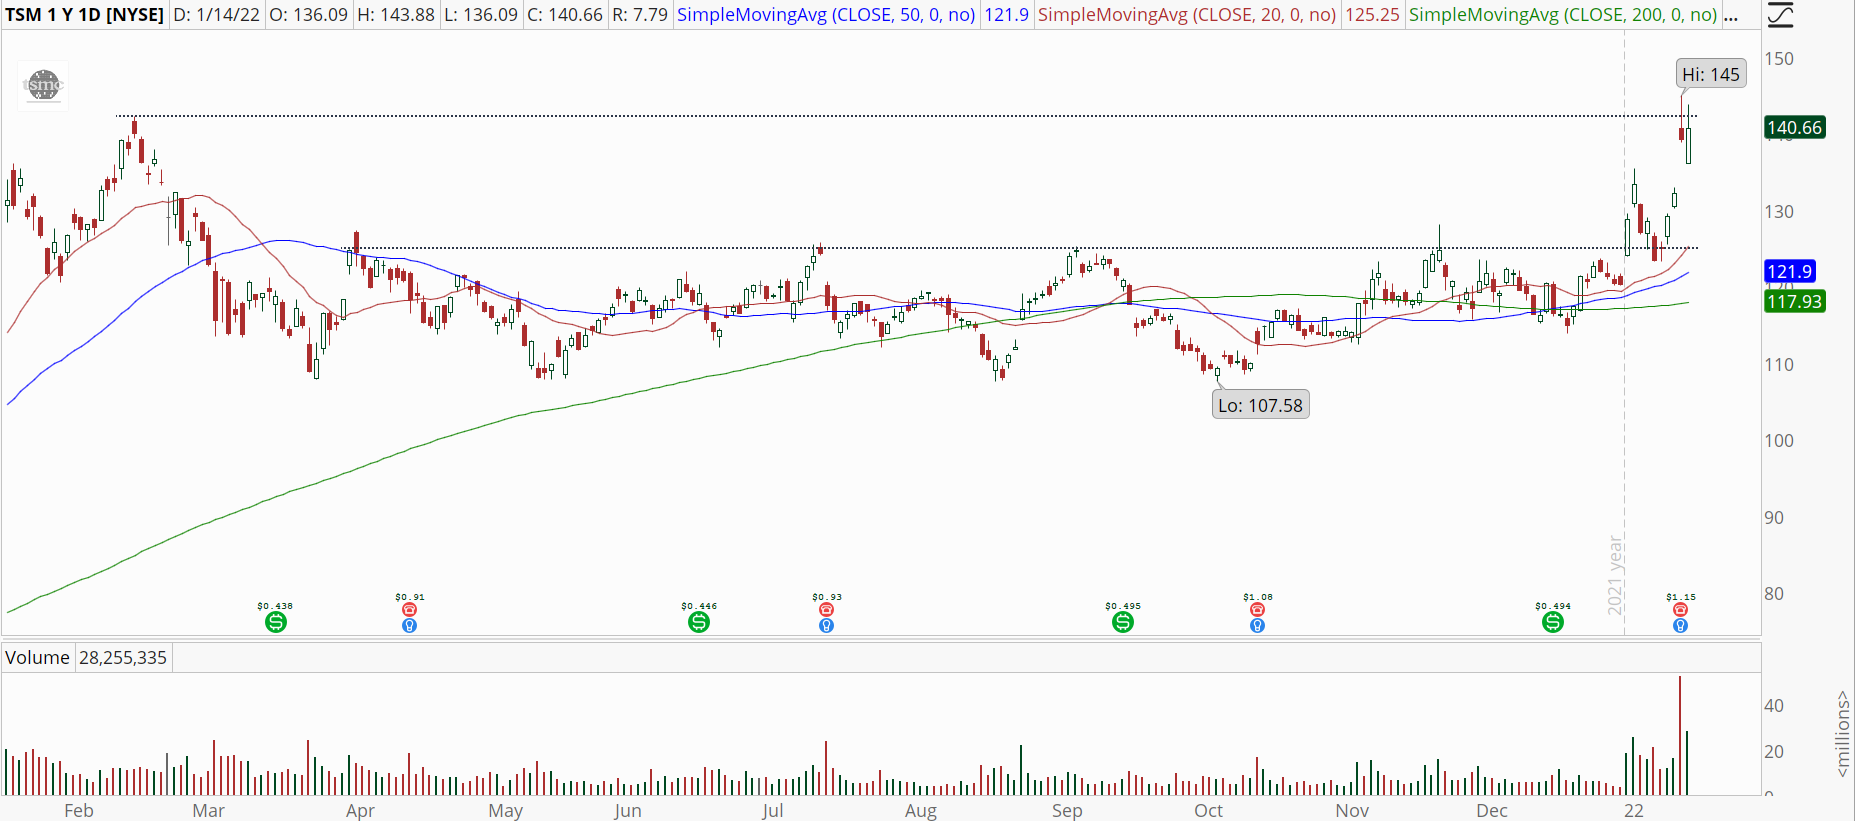 Taiwan Semiconductor (TSM) stock chart with strong earnings gap.